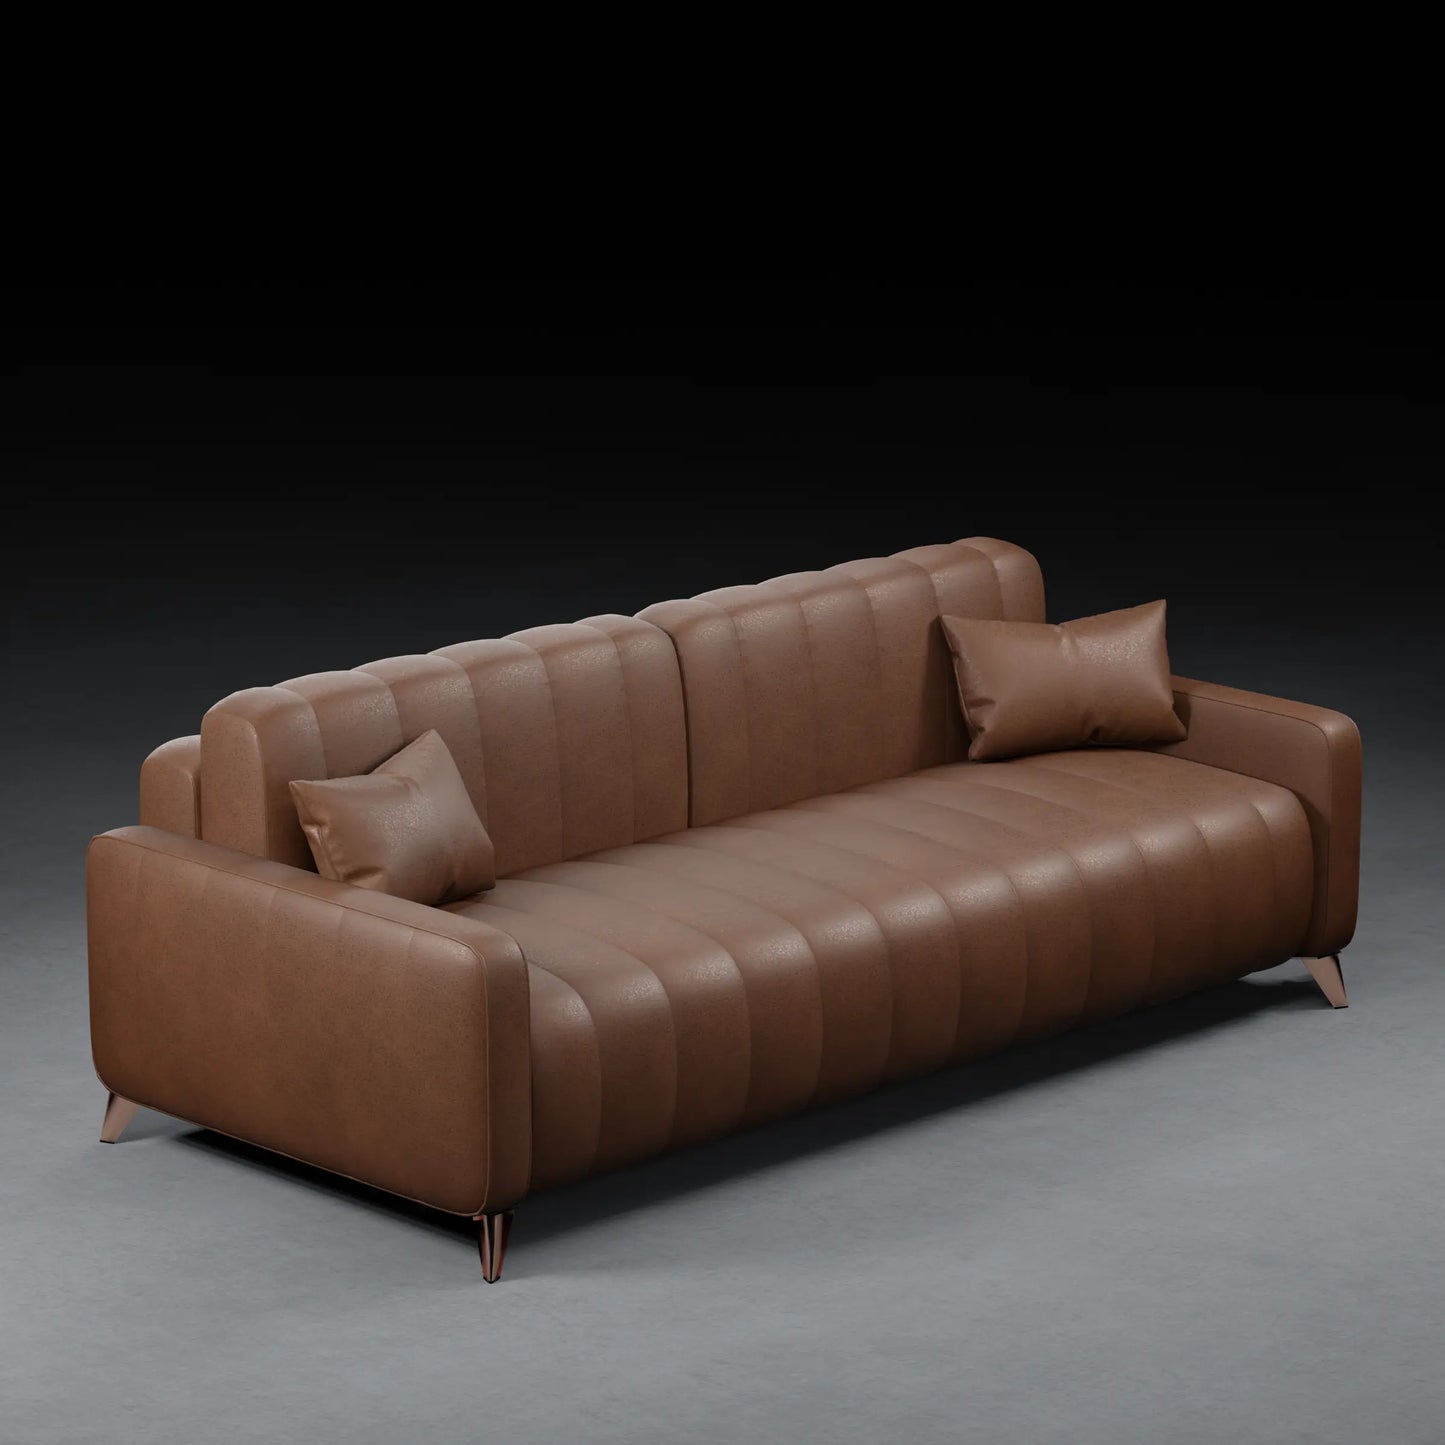 JANE - 3 Seater Tuxedo Couch in Leather Finish | Brown Color